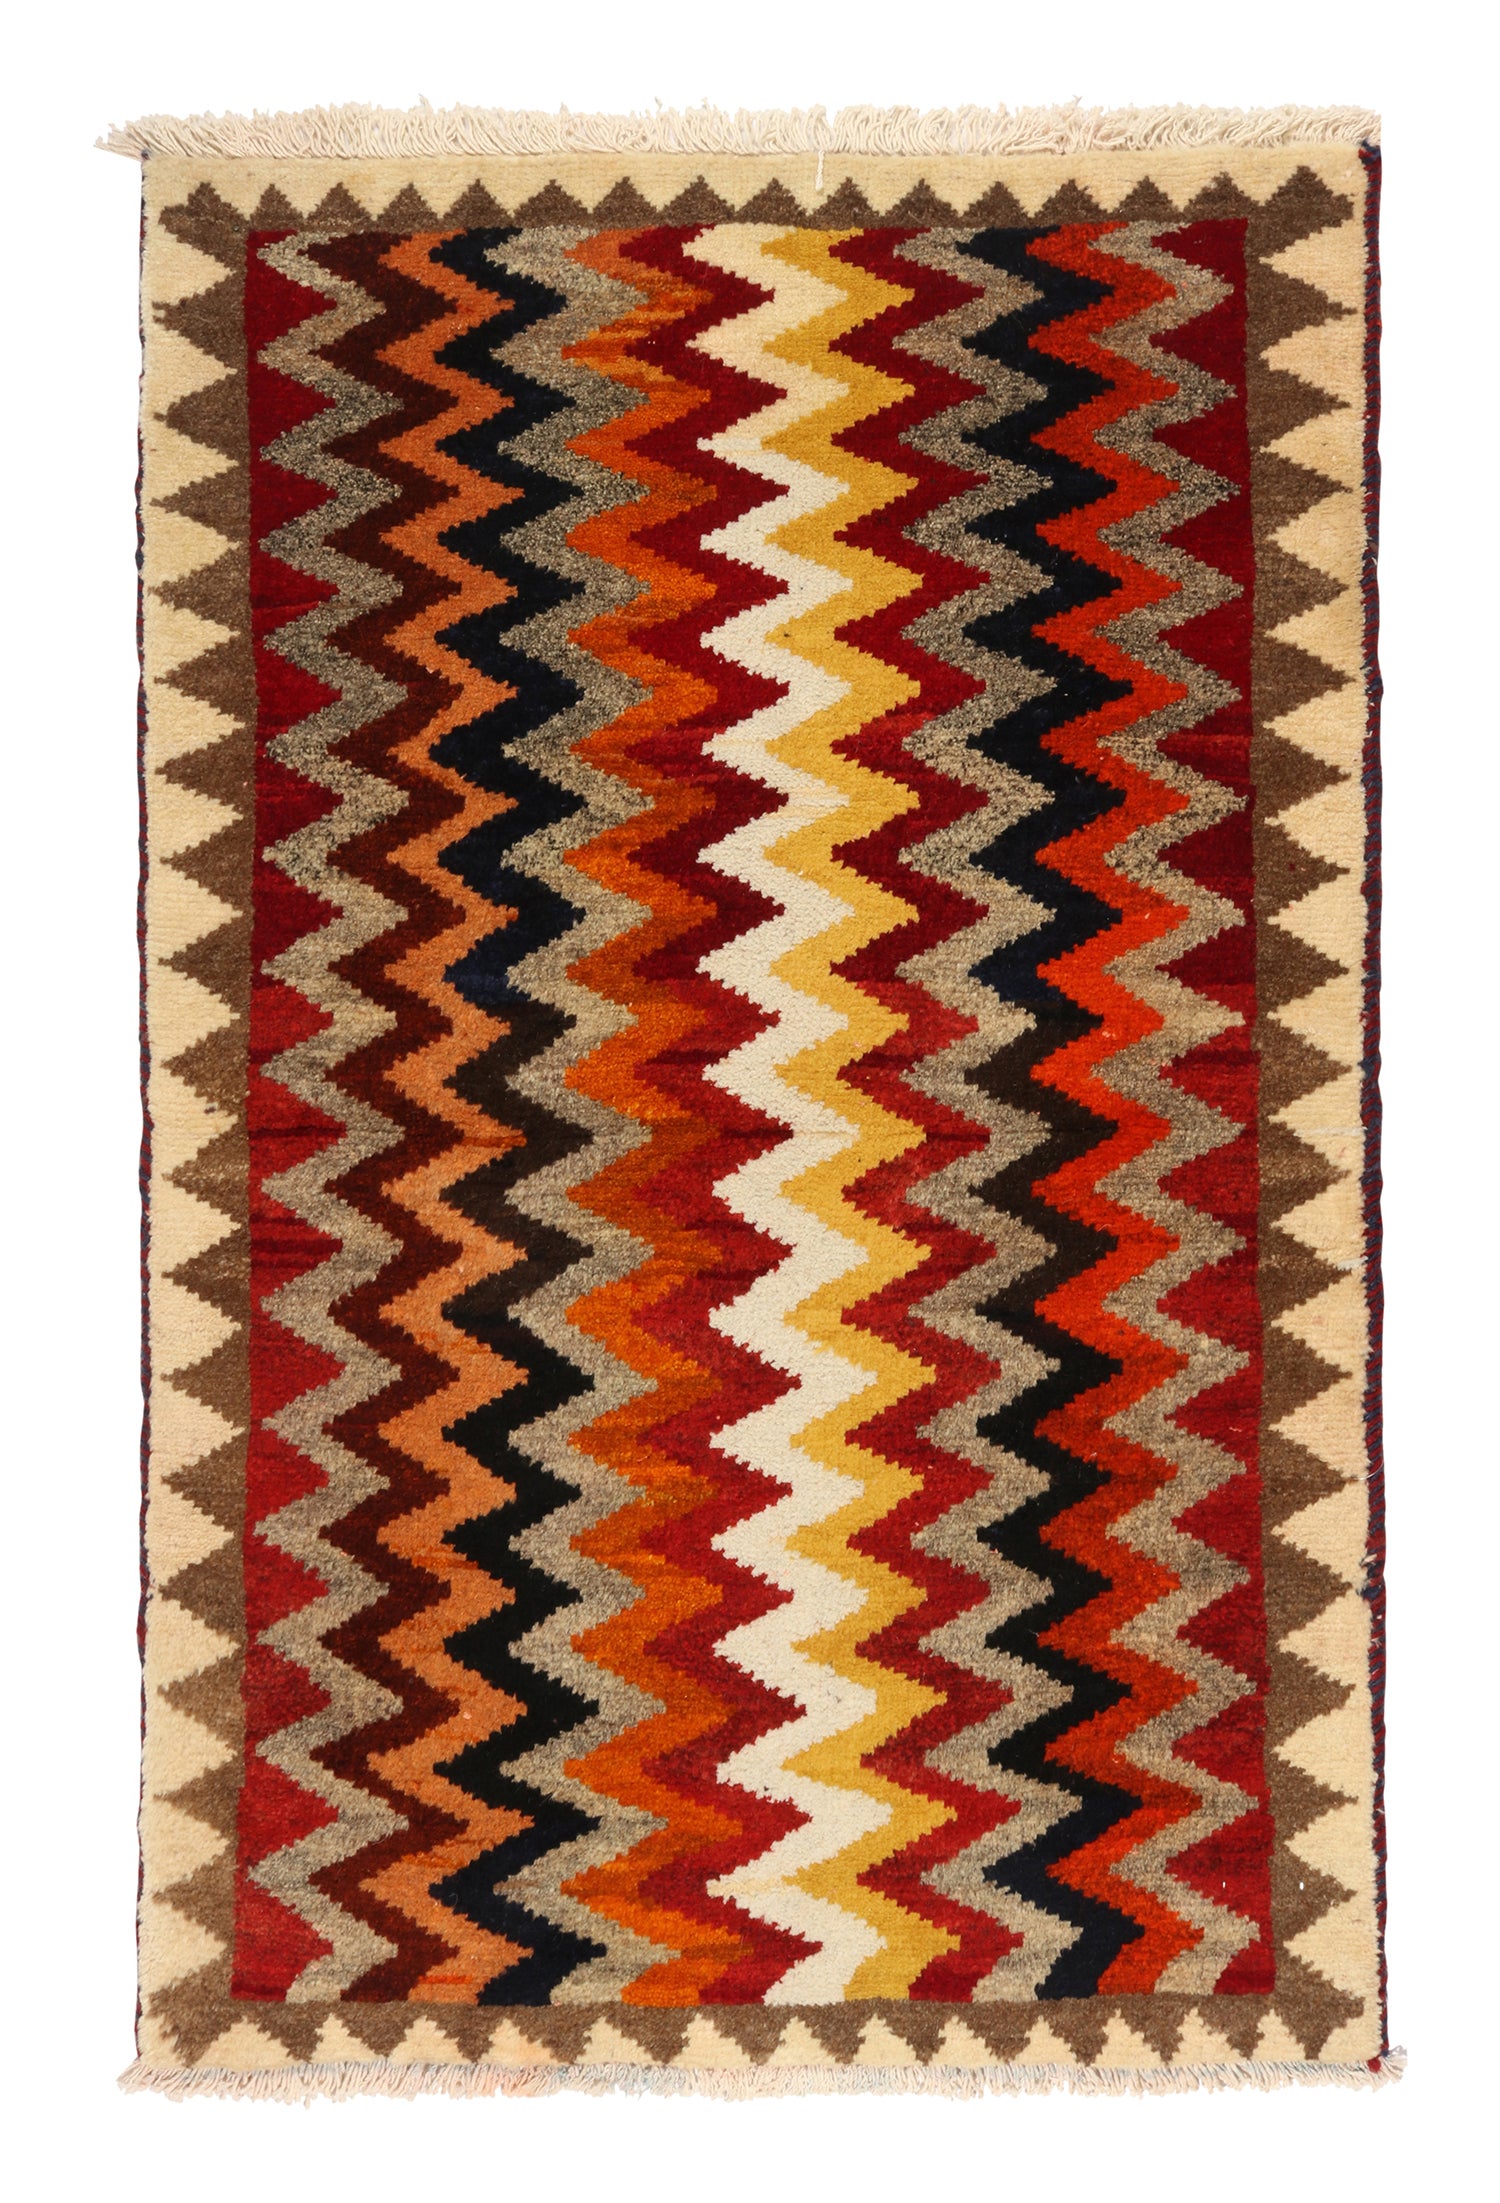 Vintage Gabbeh Persian Tribal Rug in Vibrant Chevron Patterns by Rug & Kilim For Sale